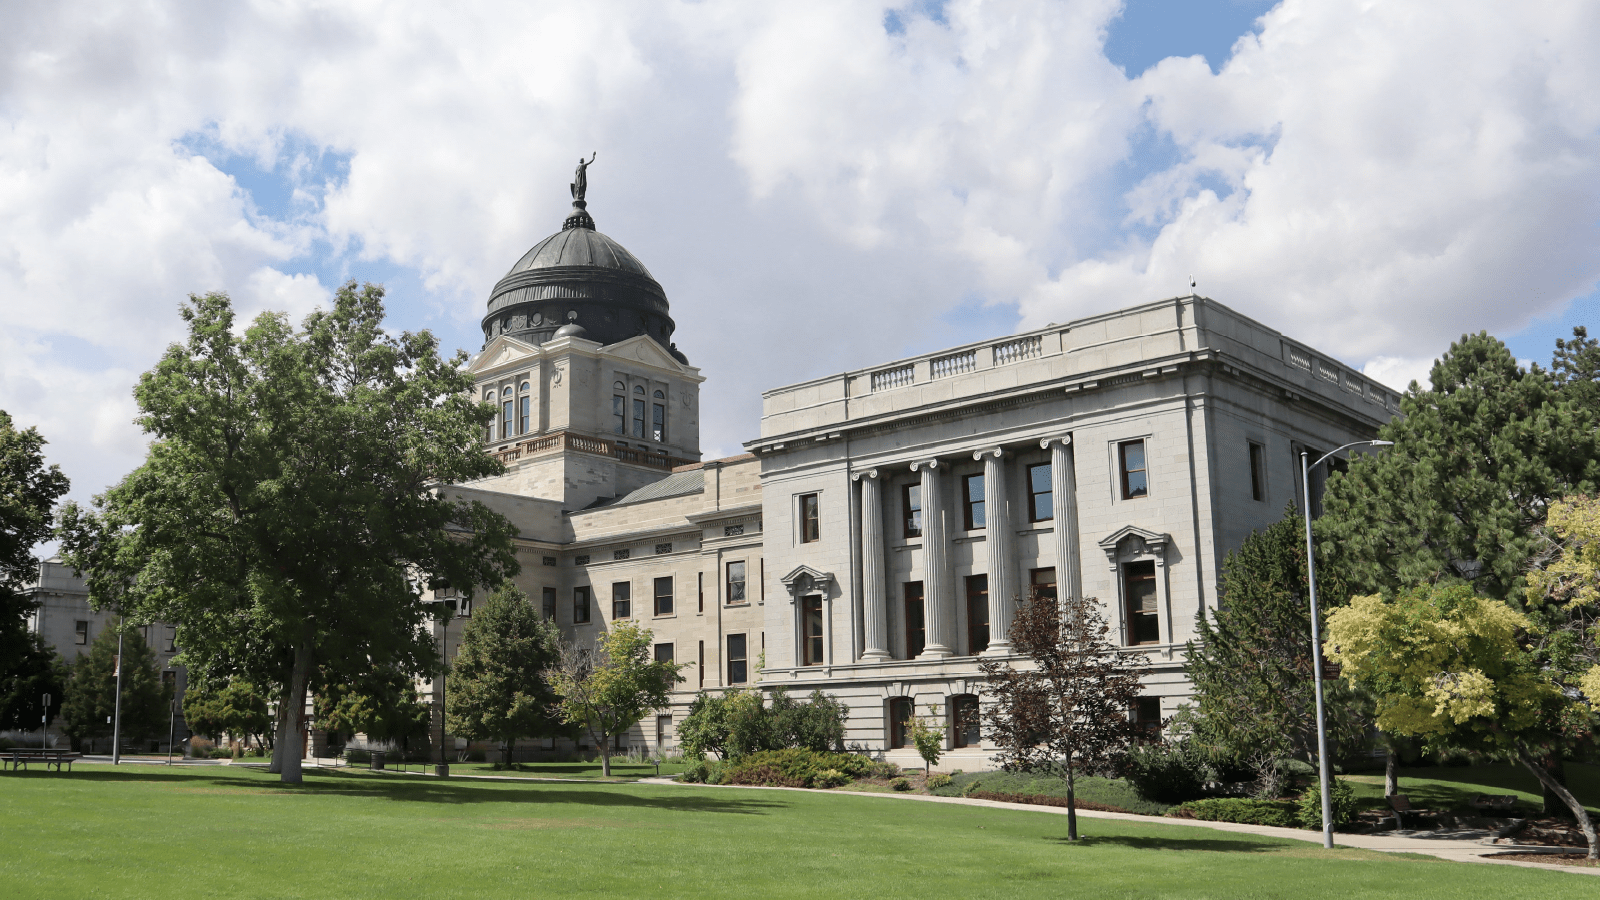 Image of the Montana State Capitol building, showcasing its neoclassical architecture with a prominent dome and statue atop, surrounded by lush greenery and a clear blue sky. Click to visit the Tax Simplification Hub.